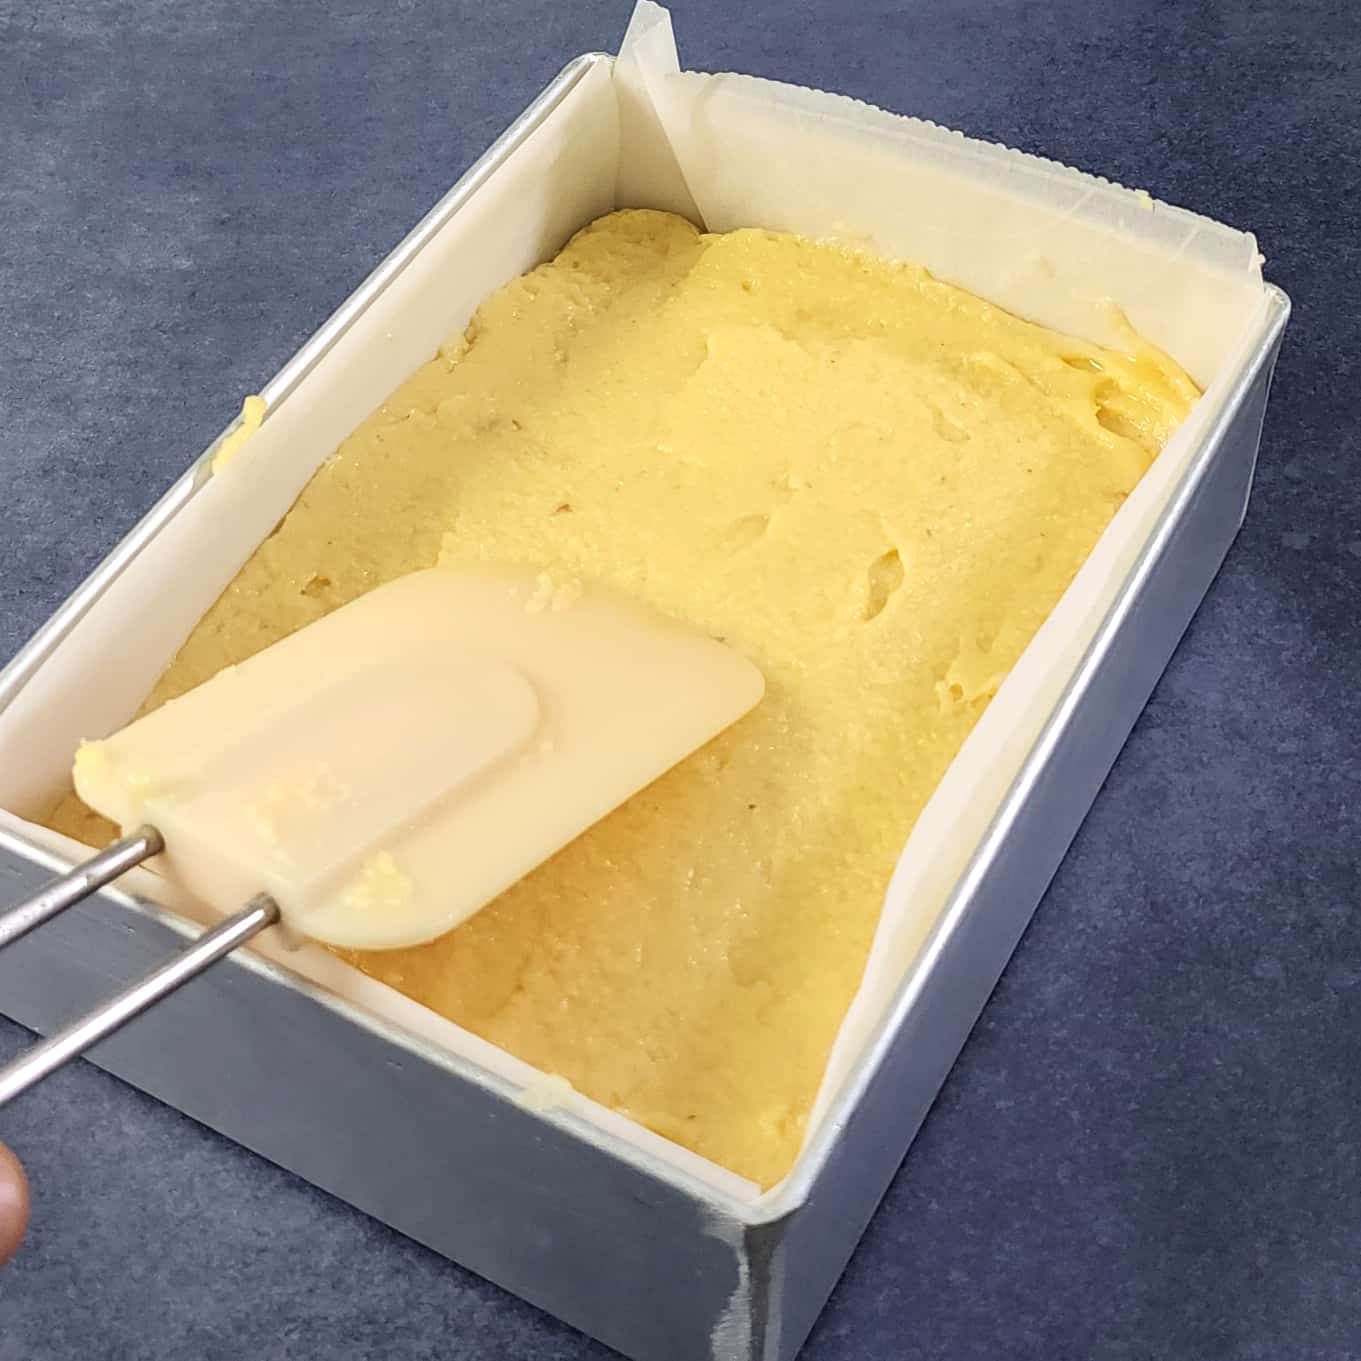 Smoothen burfi with back of spoon or spatula.